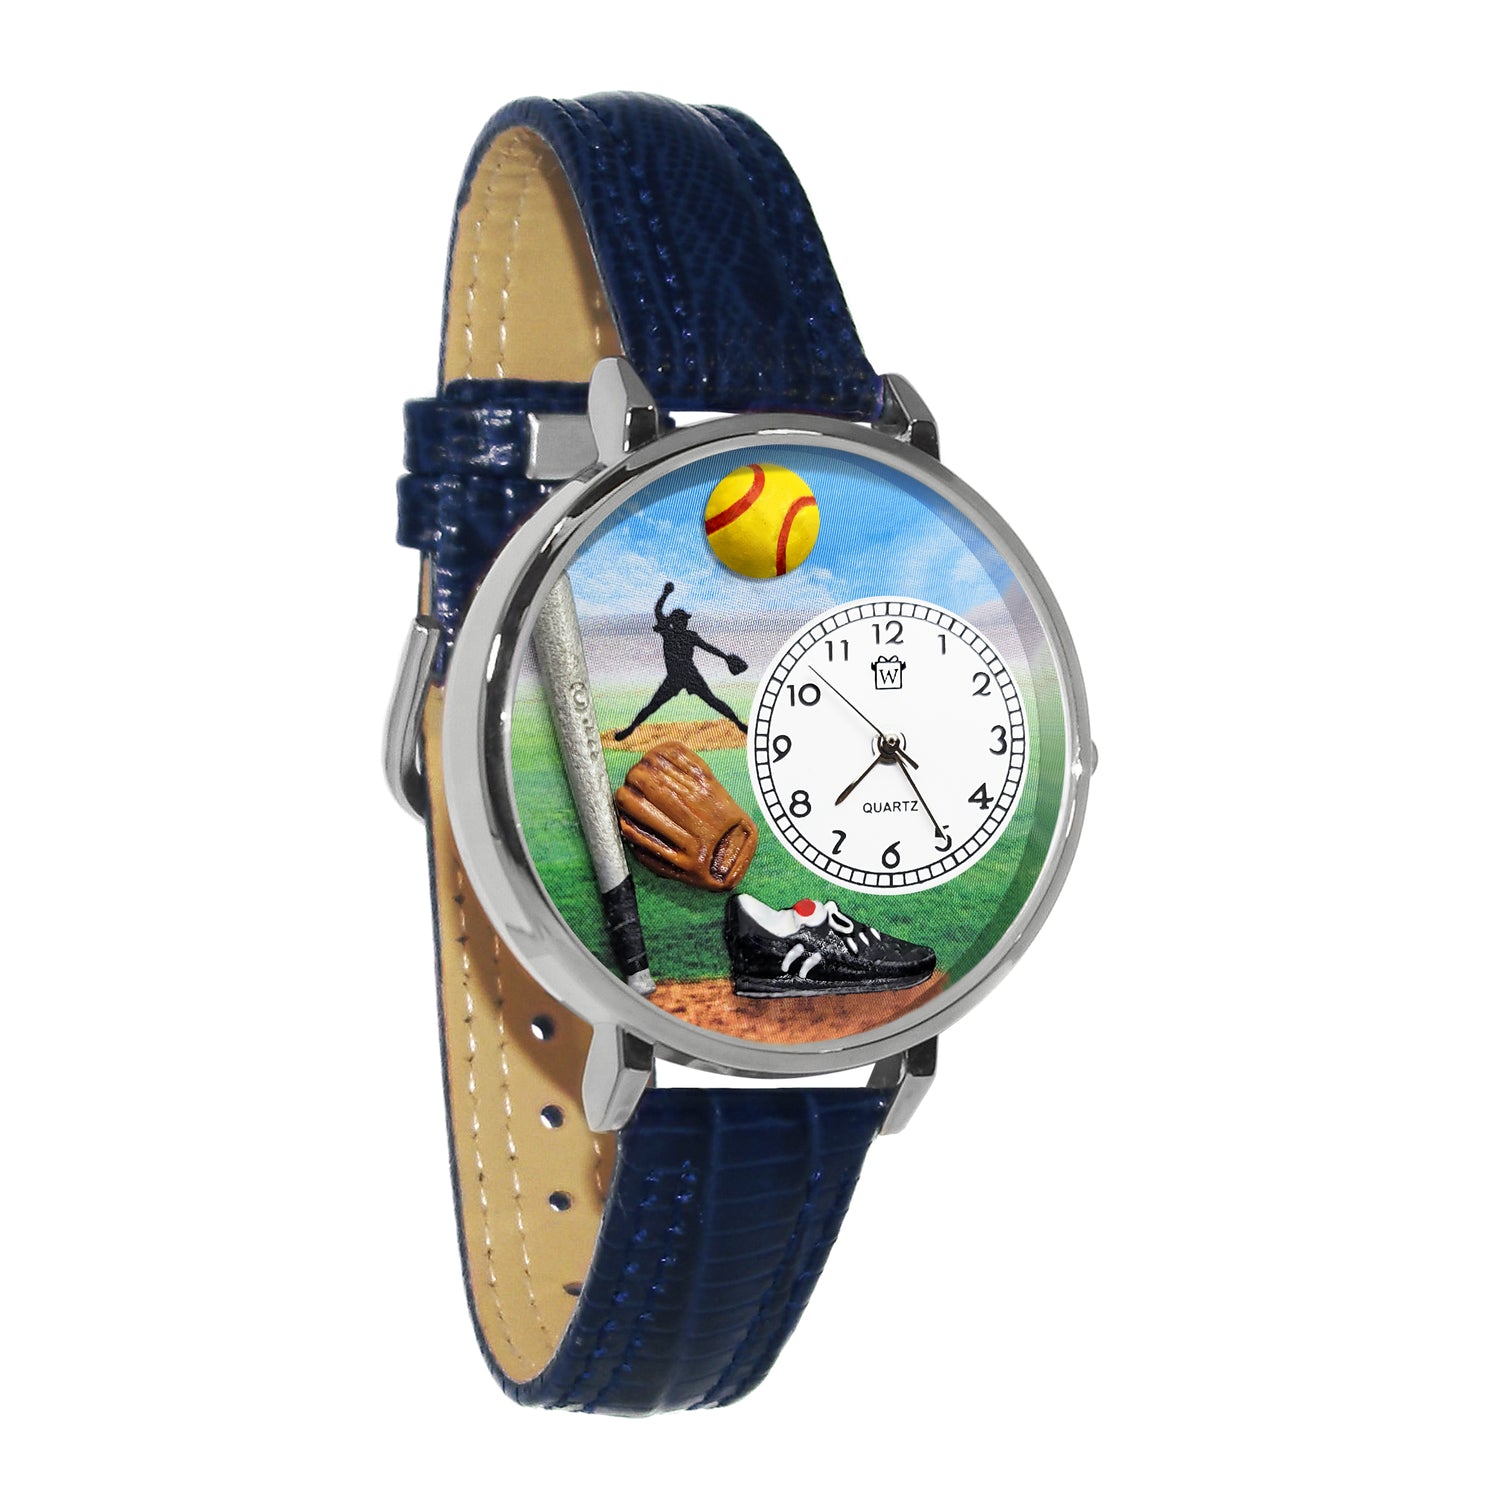 Whimsical Gifts | Softball 3D Watch Large Style | Handmade in USA | Hobbies & Special Interests | Sports | Novelty Unique Fun Miniatures Gift | Silver Finish Navy Blue Leather Watch Band